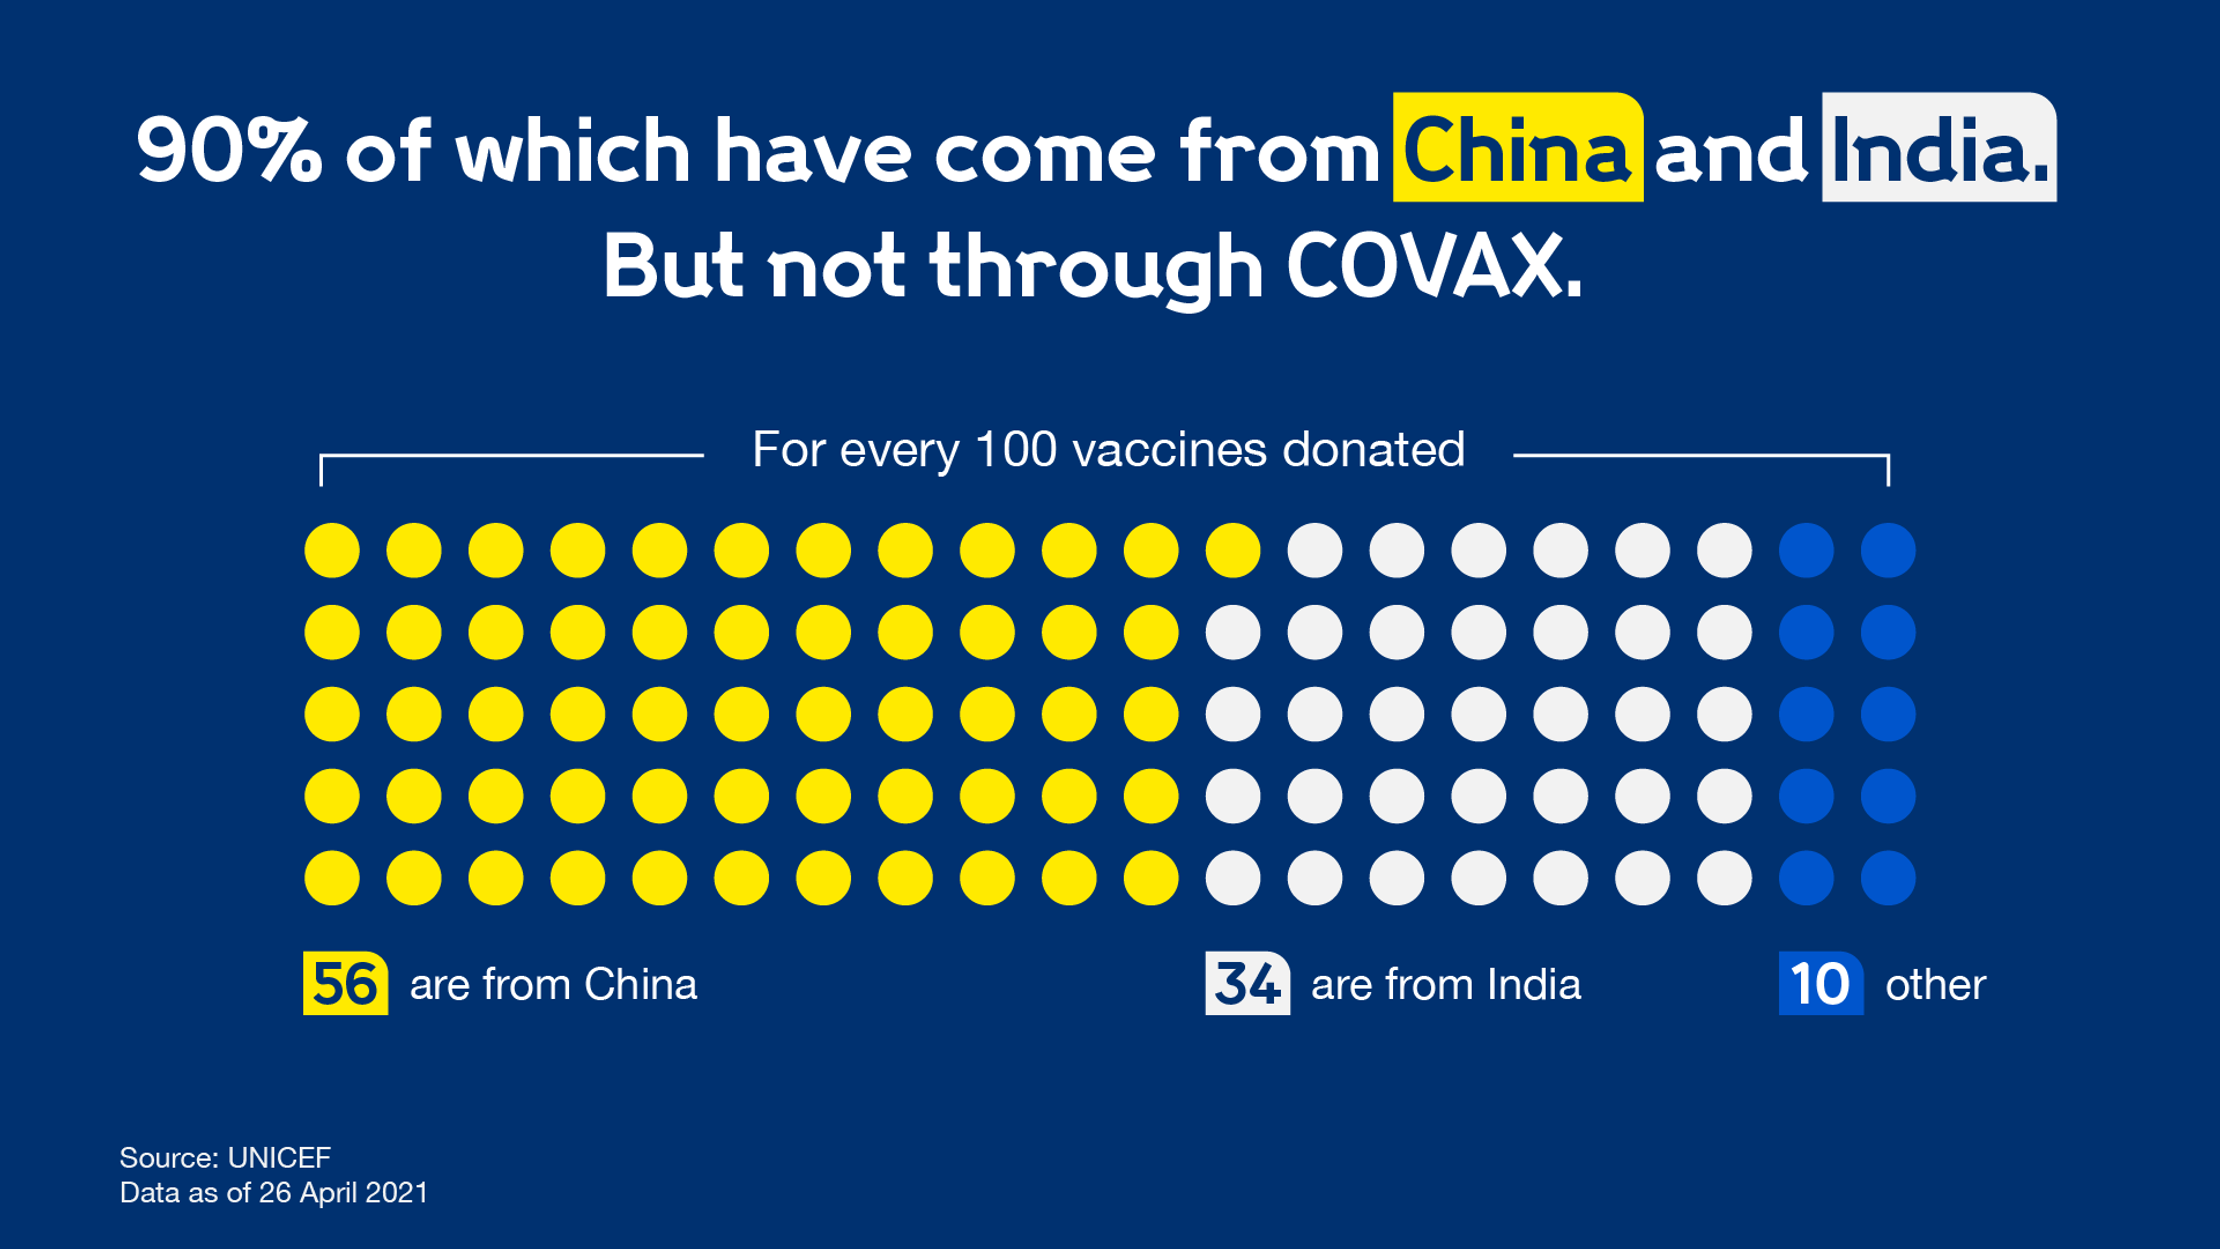 A grid of 100 dots representing donated vaccines not through the COVAX scheme. 56 dots are yellow representing vaccines from China, 34 are from India, and 10 are 'other' donors.